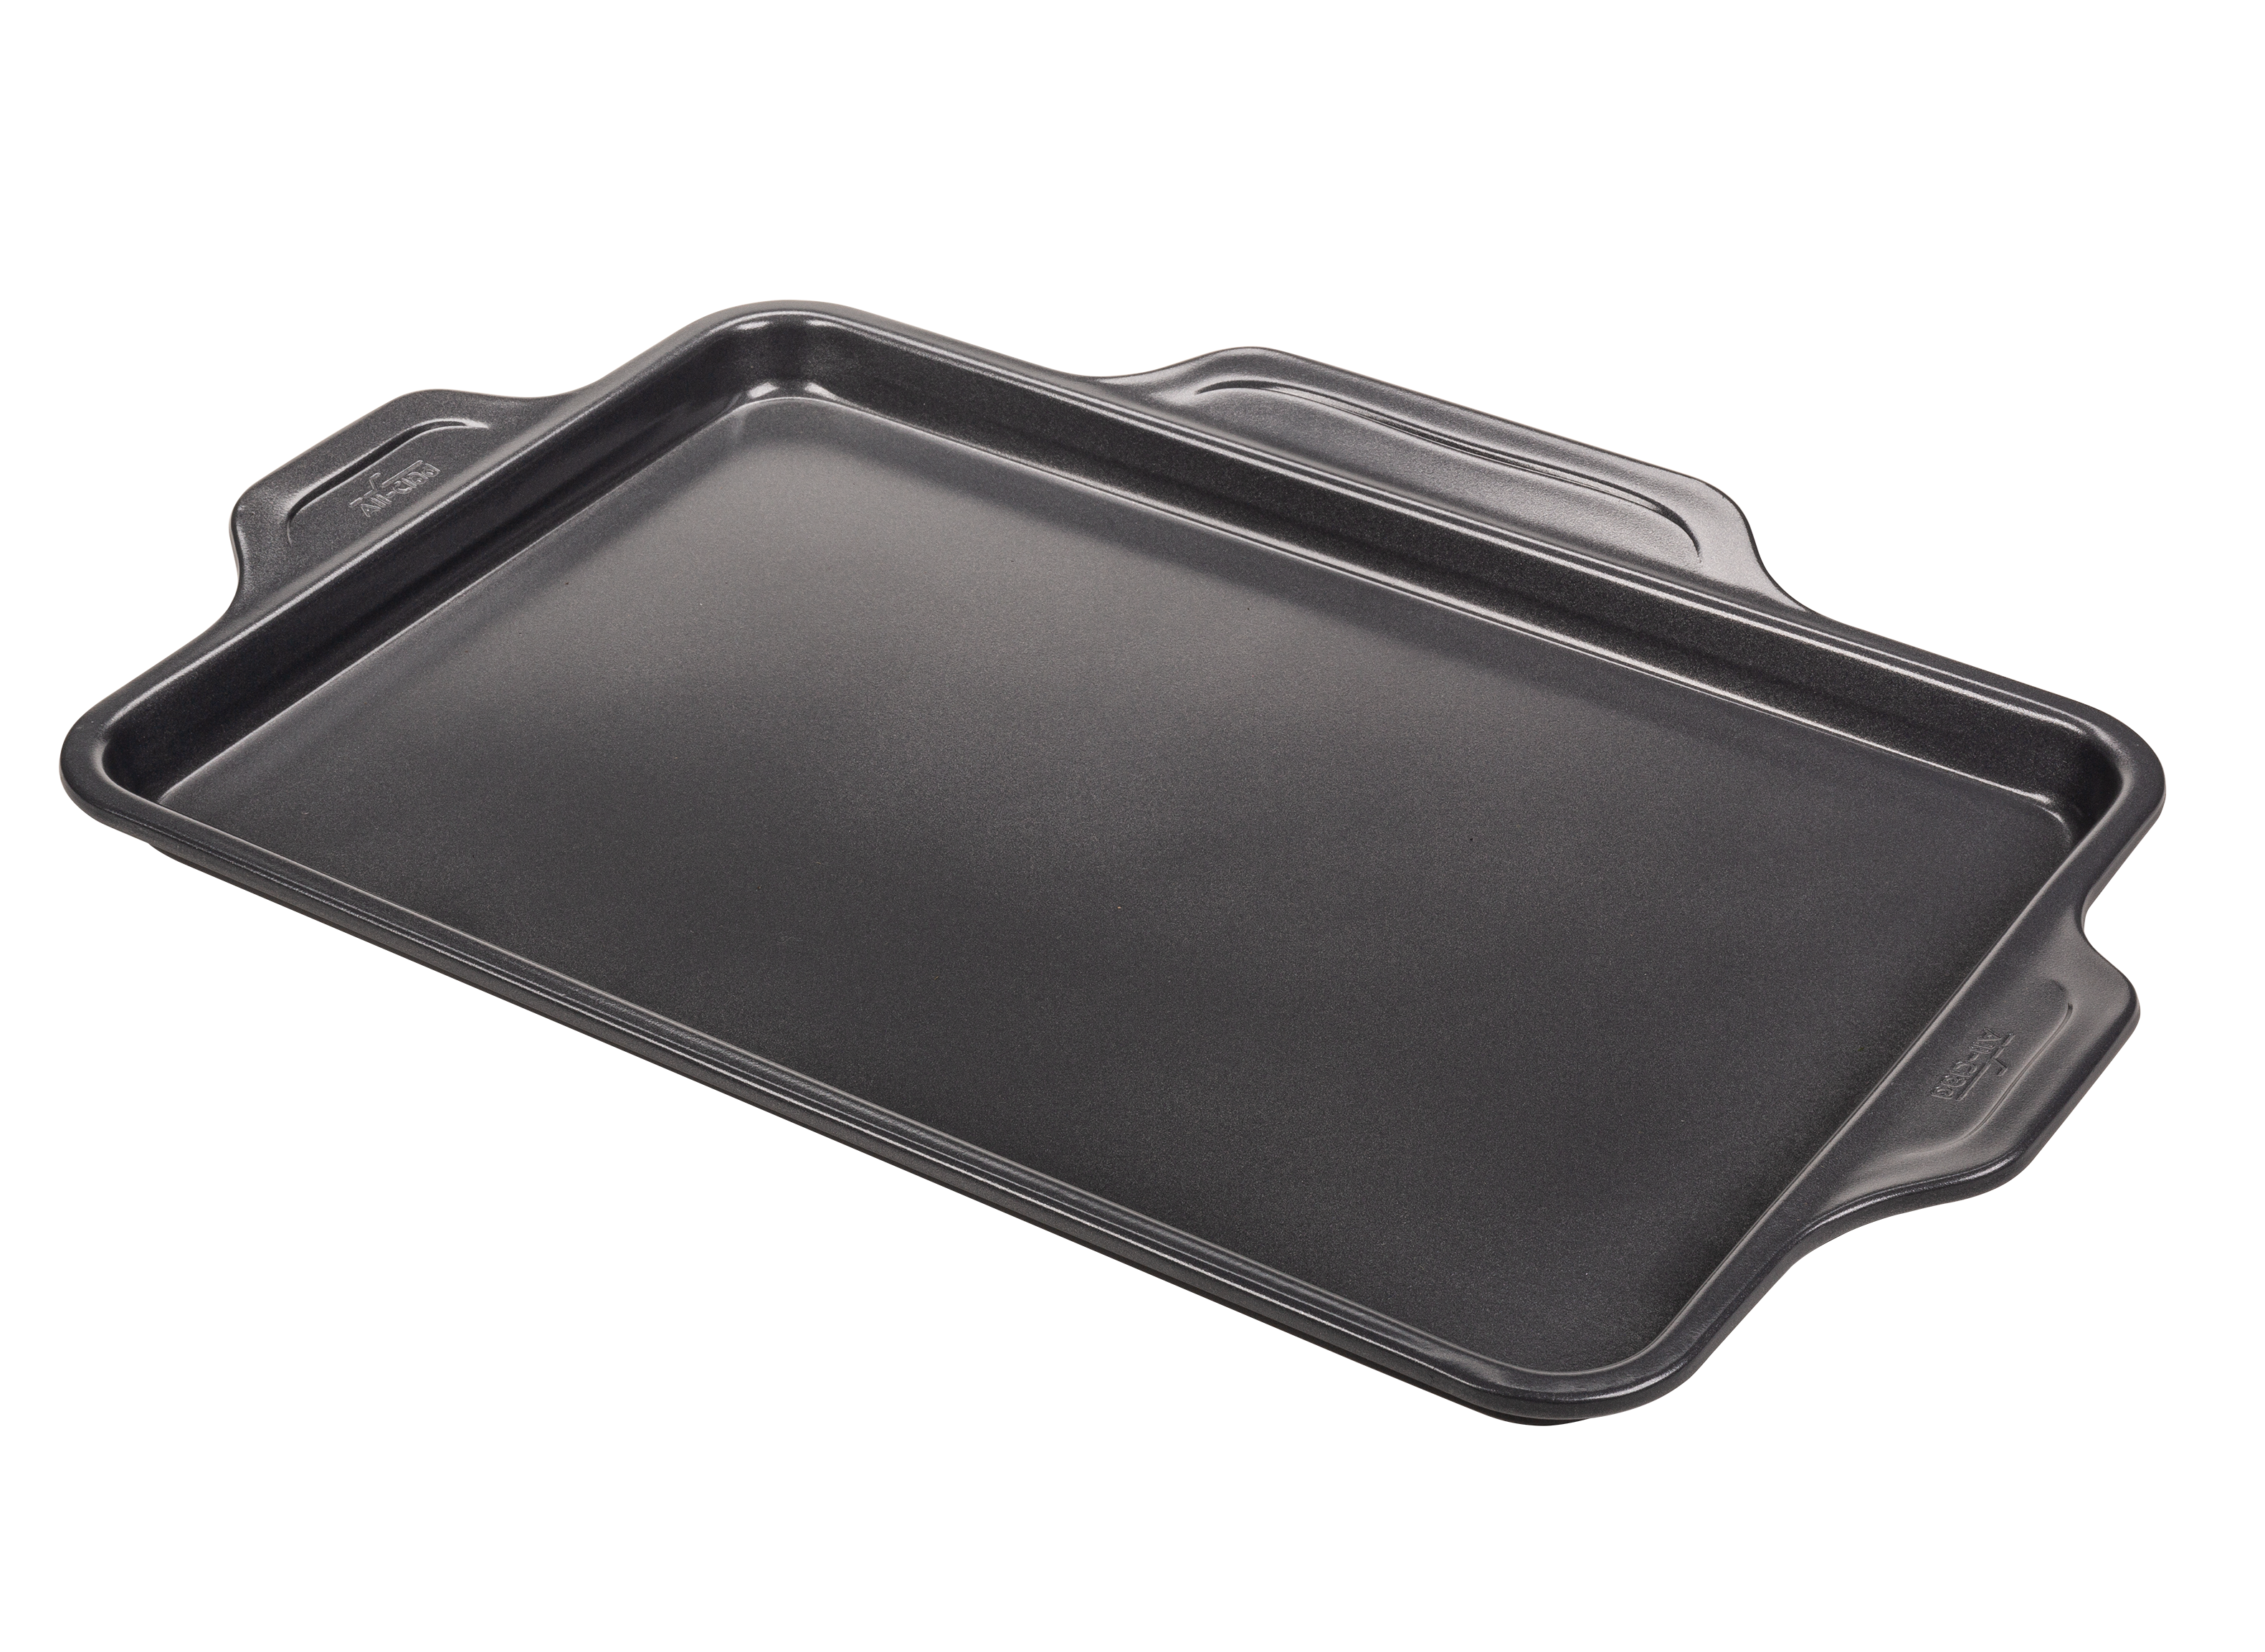 https://crdms.images.consumerreports.org/prod/products/cr/models/404165-sheet-pans-all-clad-pro-release-nonstick-half-sheet-pan-10022099.png